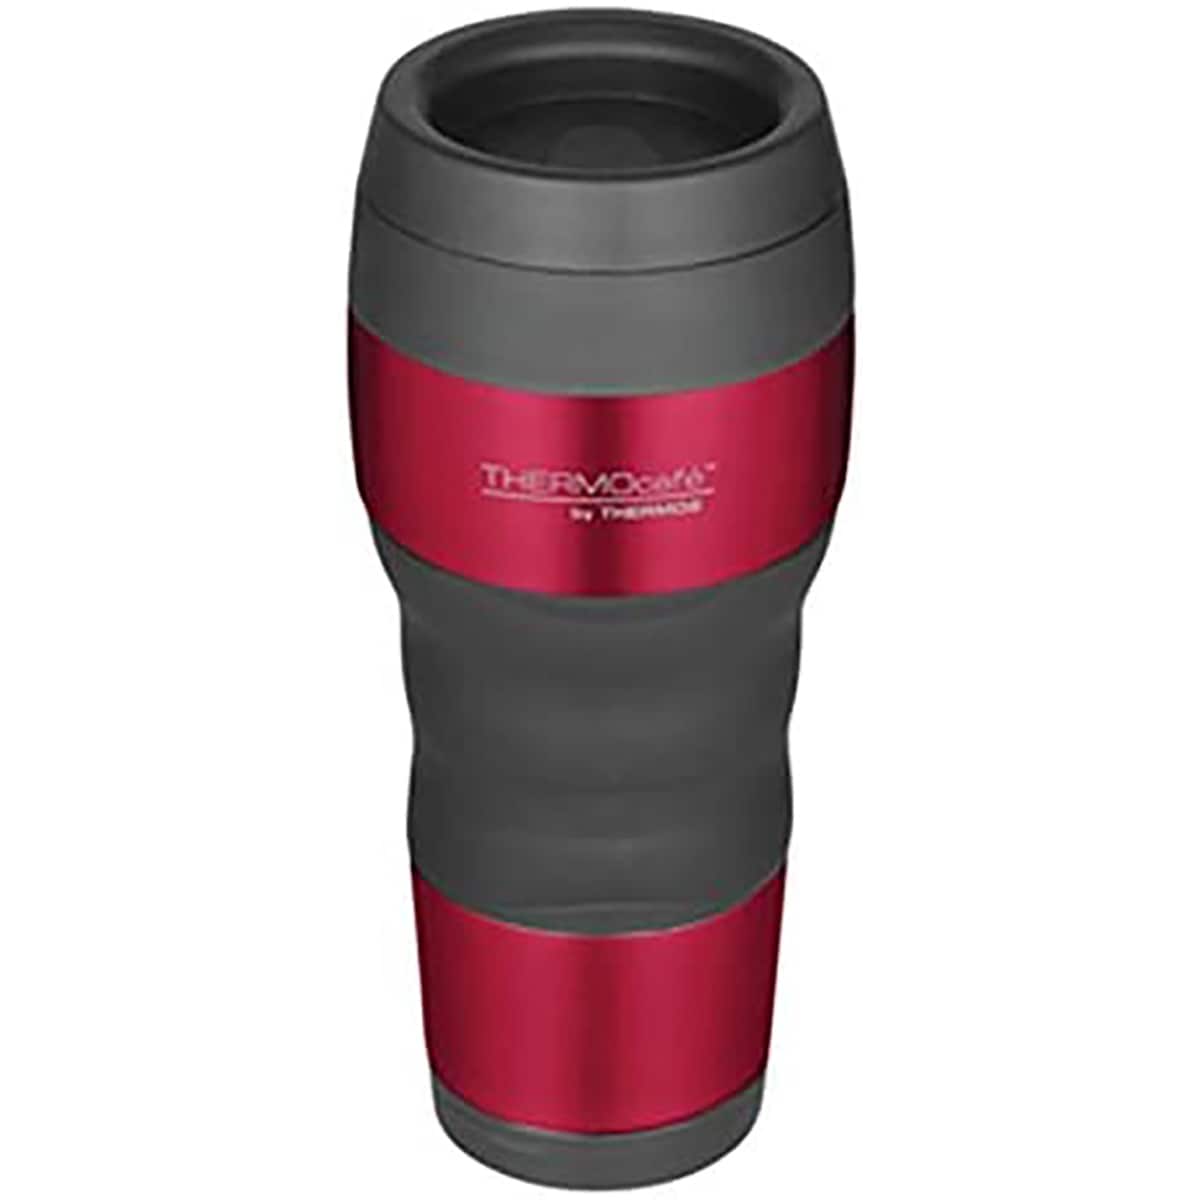 https://ak1.ostkcdn.com/images/products/is/images/direct/8a27cd6cb61fa0c36ec768a74883dfc7bbaf743e/Thermos-16-oz.-ThermoCafe-Stainless-Steel-Travel-Tumbler-w--Grip---Red.jpg